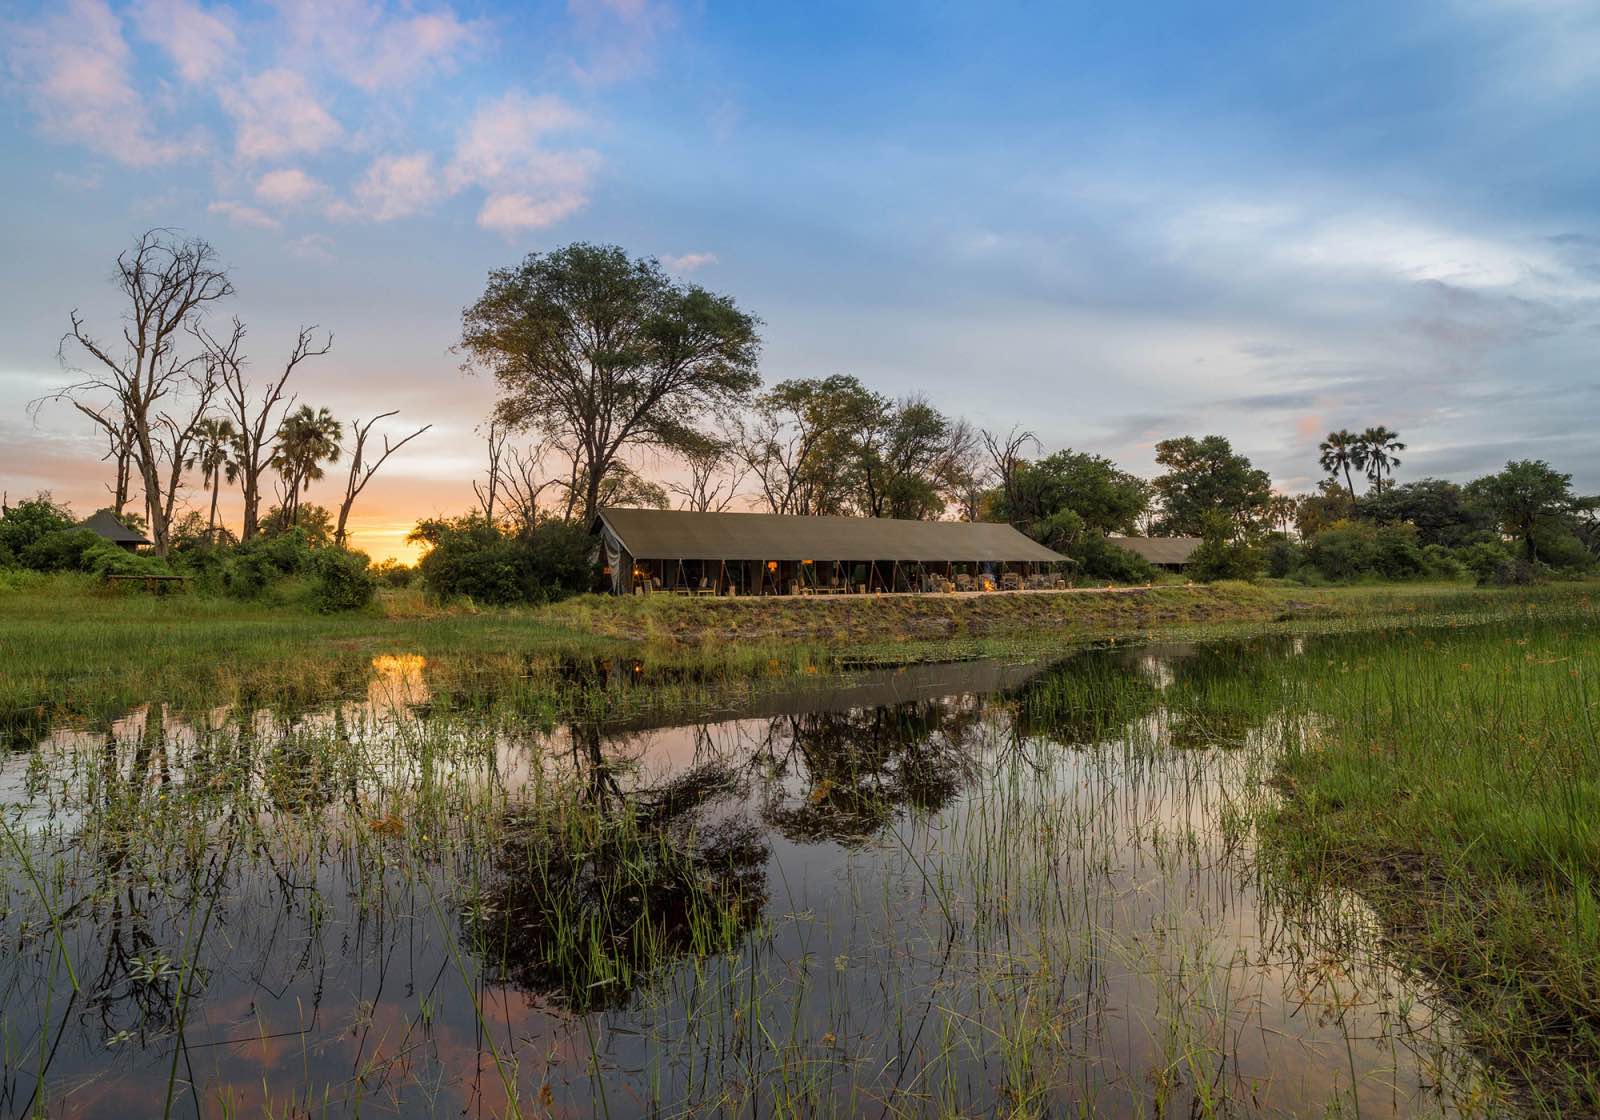 Gomoti Plains Camp overlooking the Khwai River and Moremi